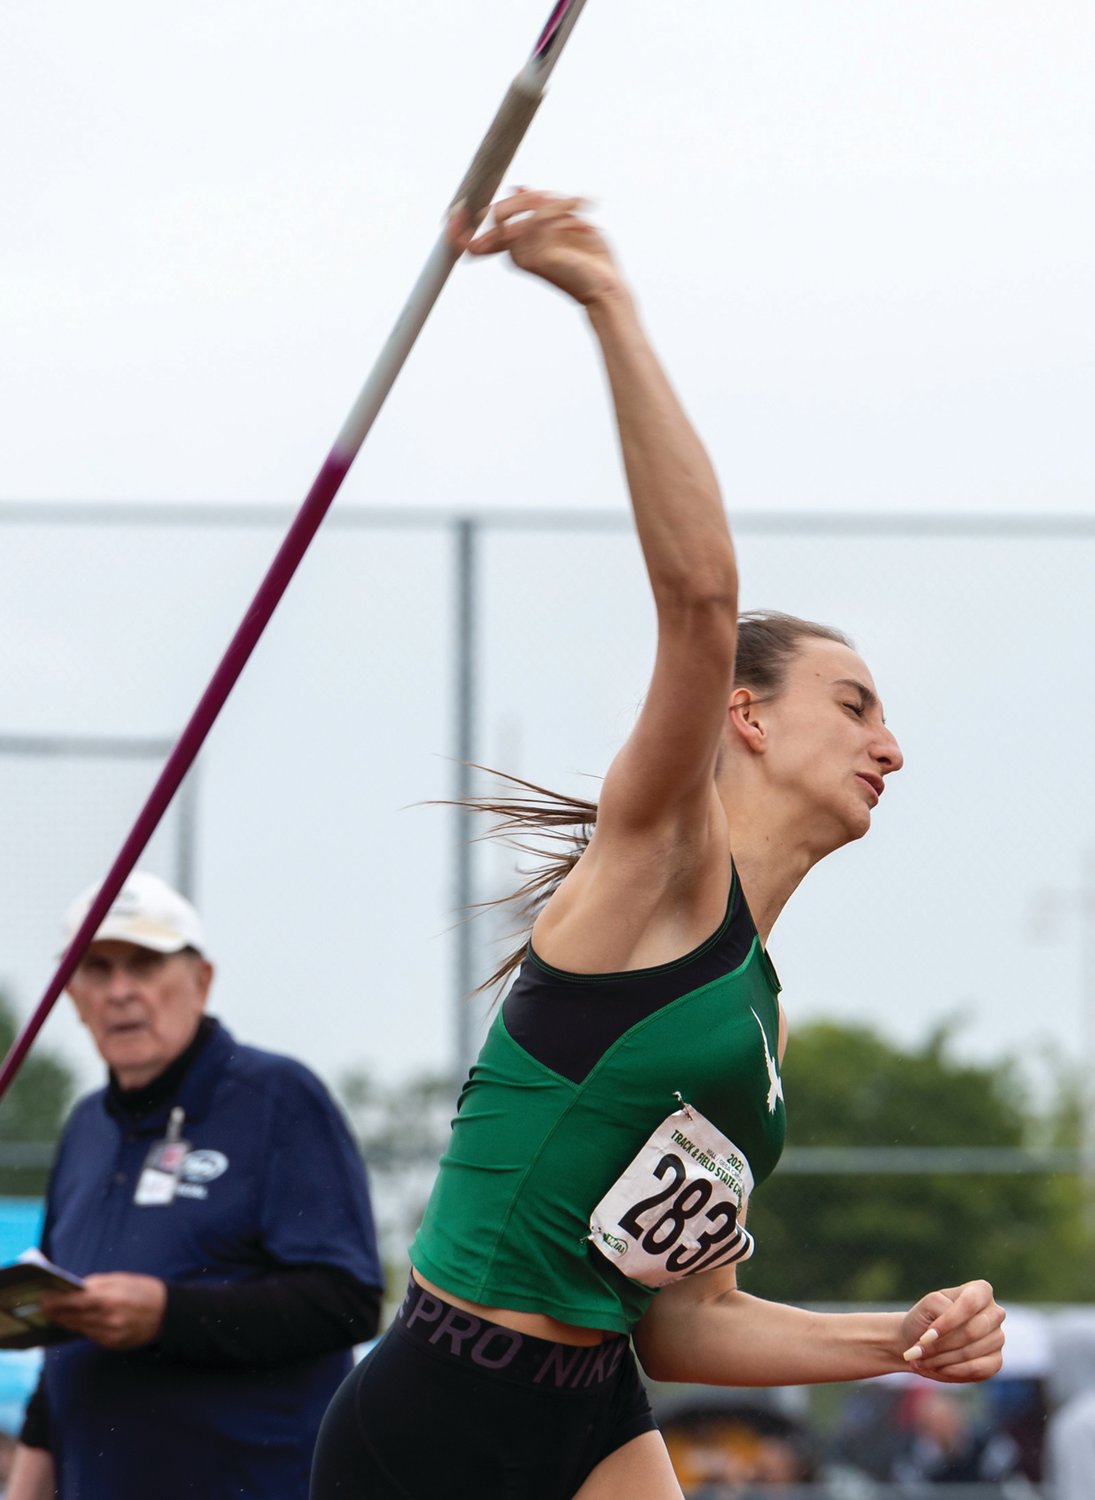 Tumwater's Natalie Sumrok heaves a javelin in the 2A Girls Javelin at the 2A/3A/4A State Track and Field Championships on Thursday, May 26, 2022, at Mount Tahoma High School in Tacoma. (Joshua Hart/For The Chronicle)